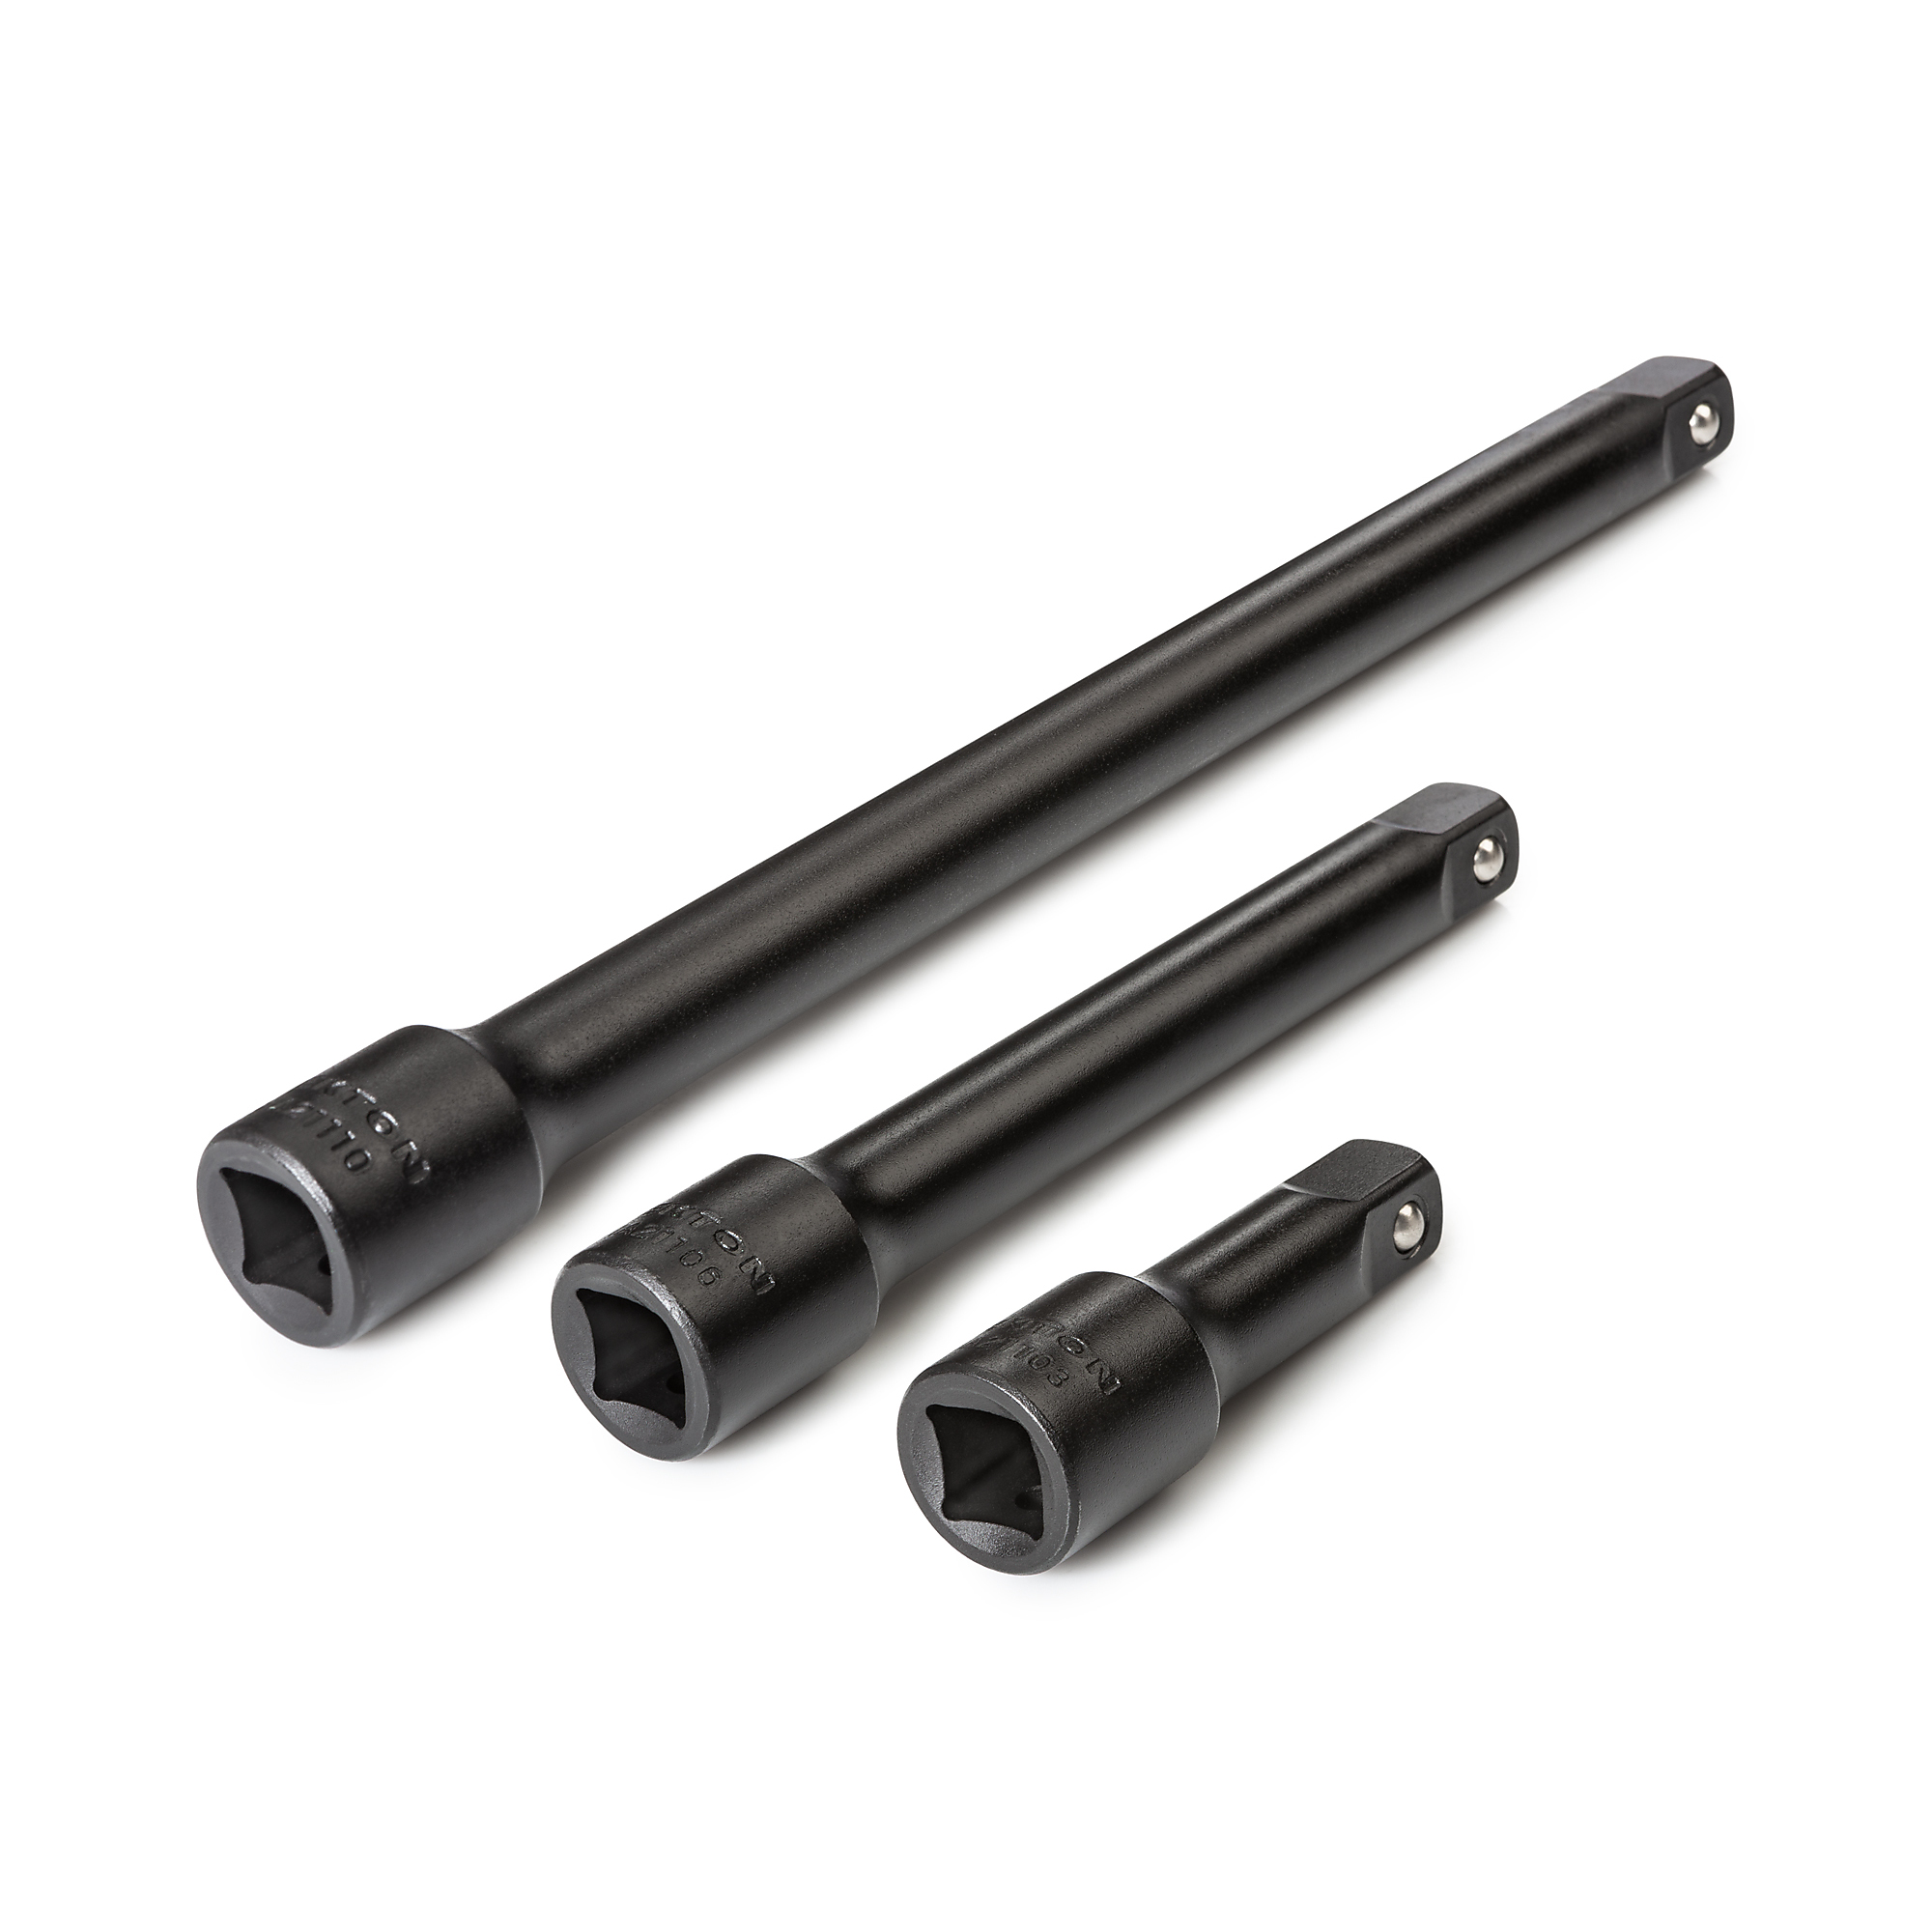 Tekton, 3-pc 1/2Inch Drive Impact Extension Set, Pieces (qty.) 3 Drive Size 1/2 in, Model SIA92001